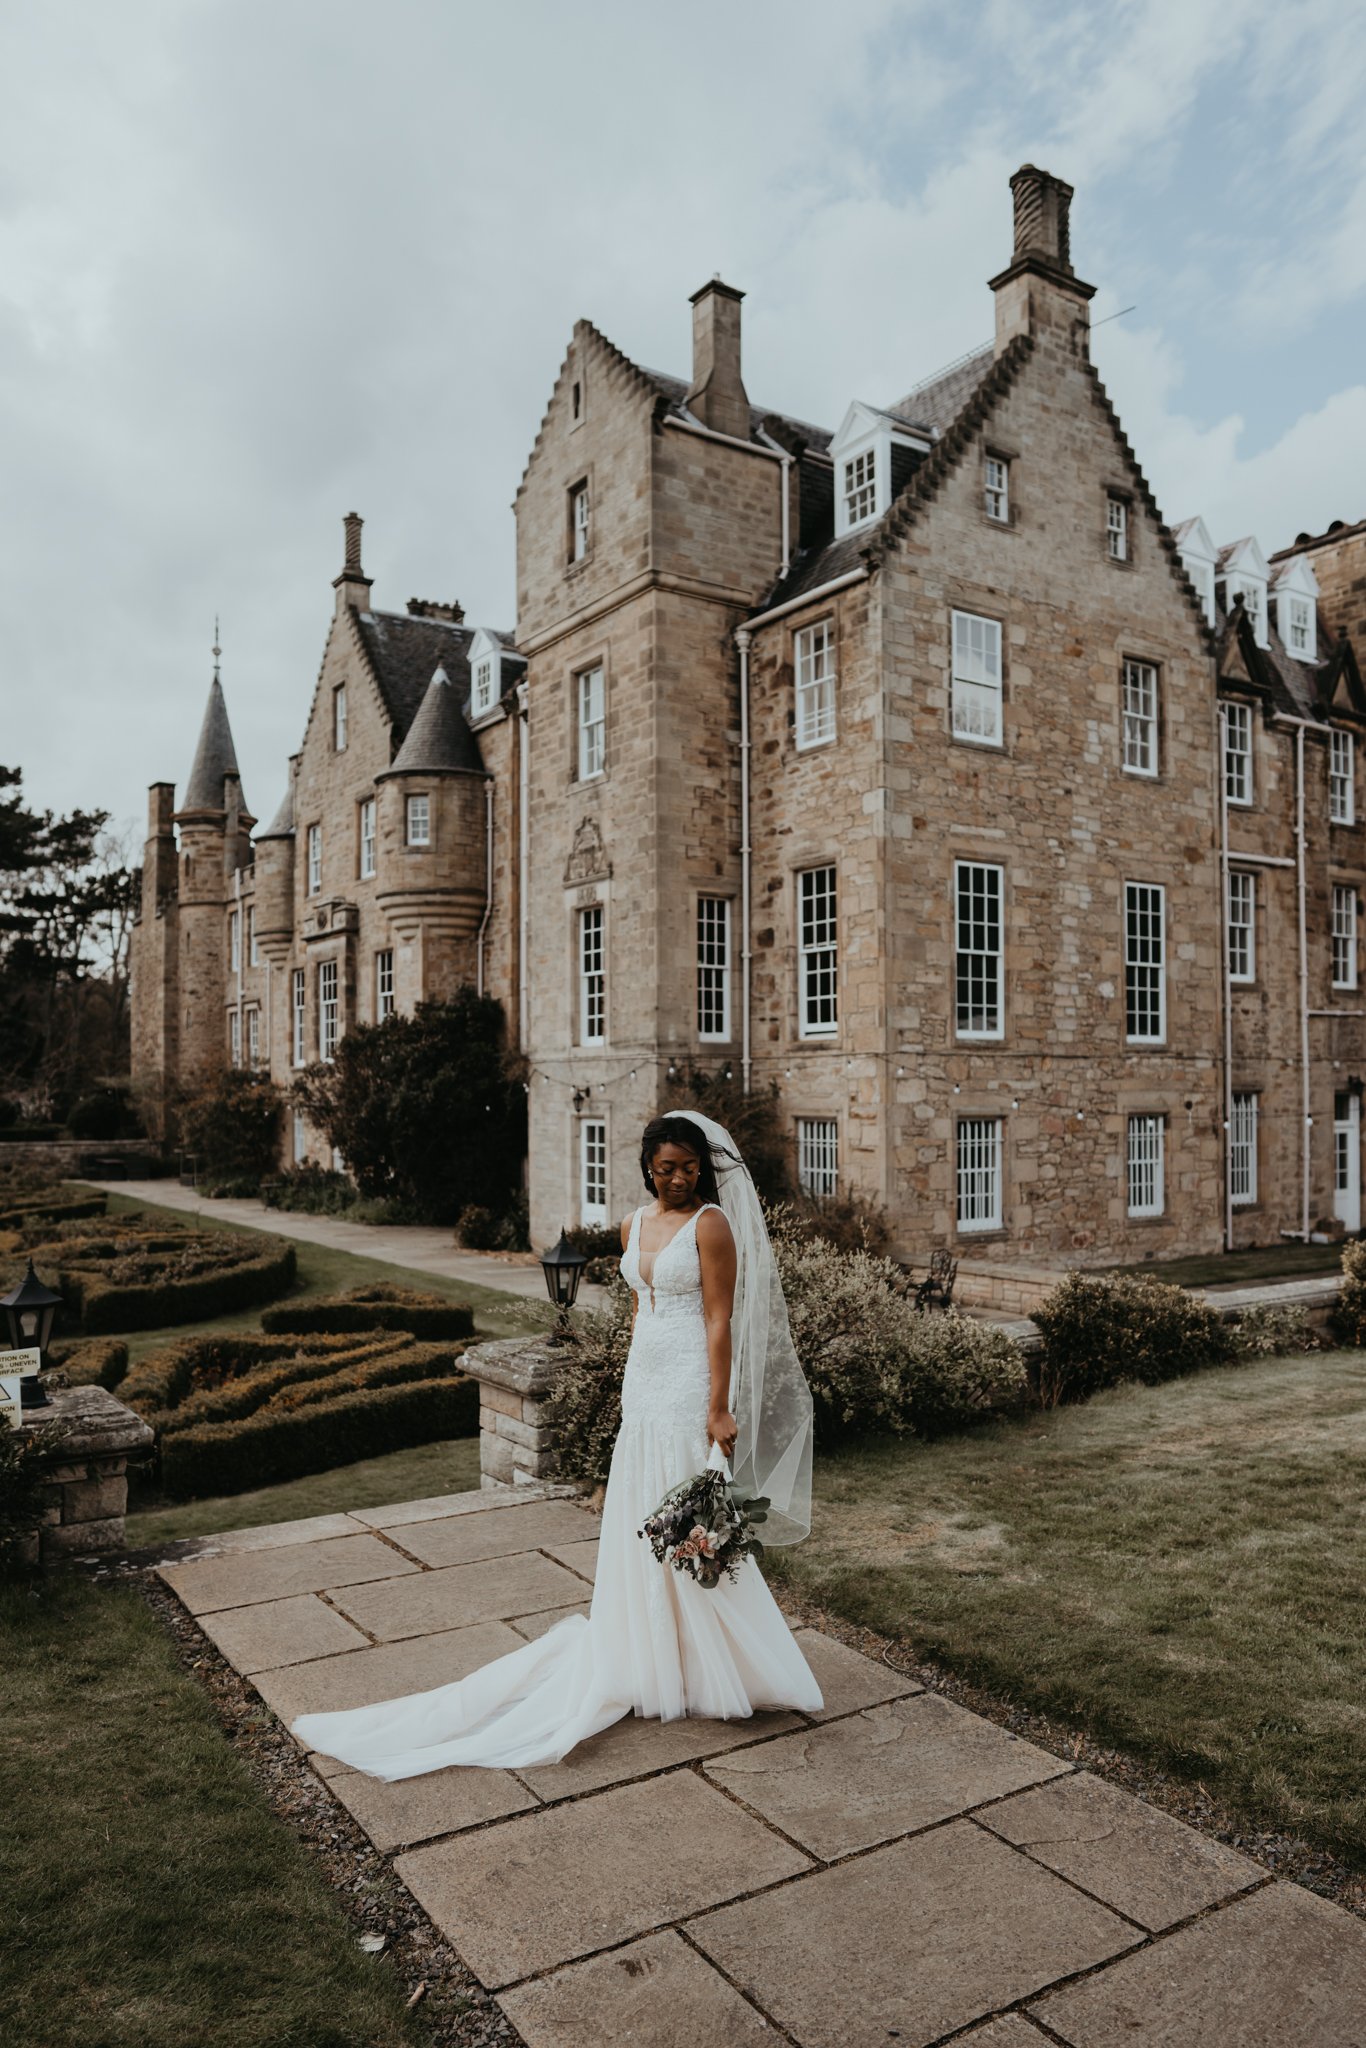  A beautiful destination wedding at Carberry Tower Manion House Scotland. 